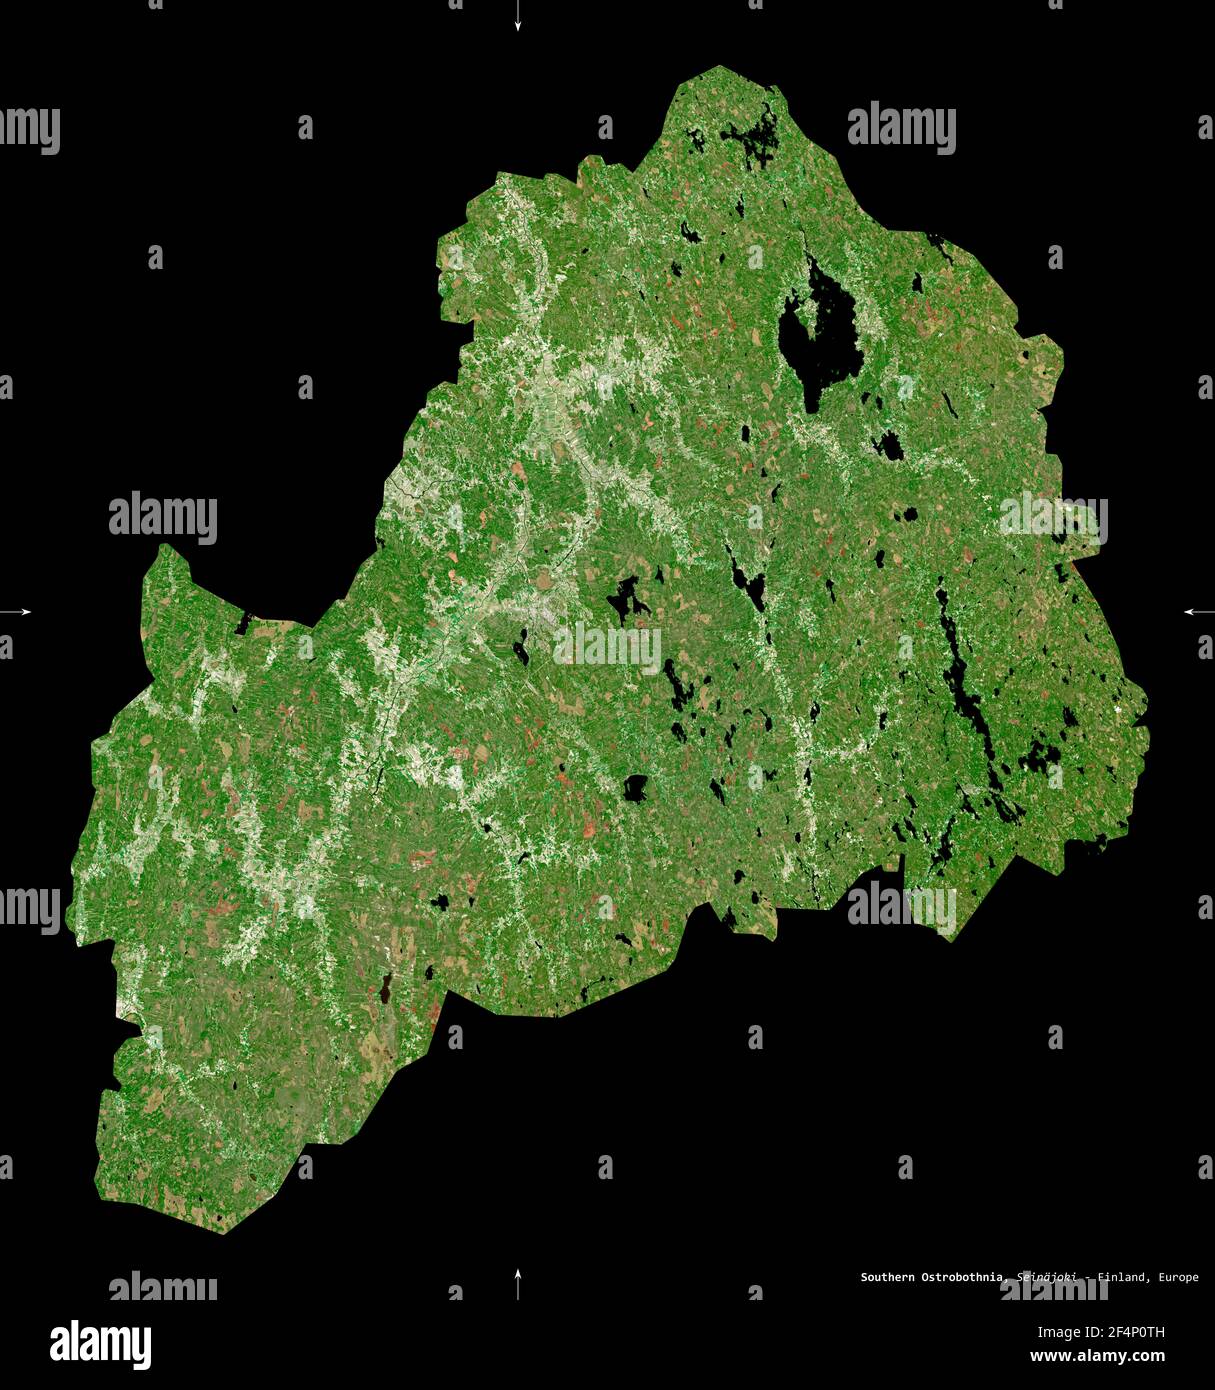 Southern Ostrobothnia, region of Finland. Sentinel-2 satellite imagery. Shape isolated on black. Description, location of the capital. Contains modifi Stock Photo